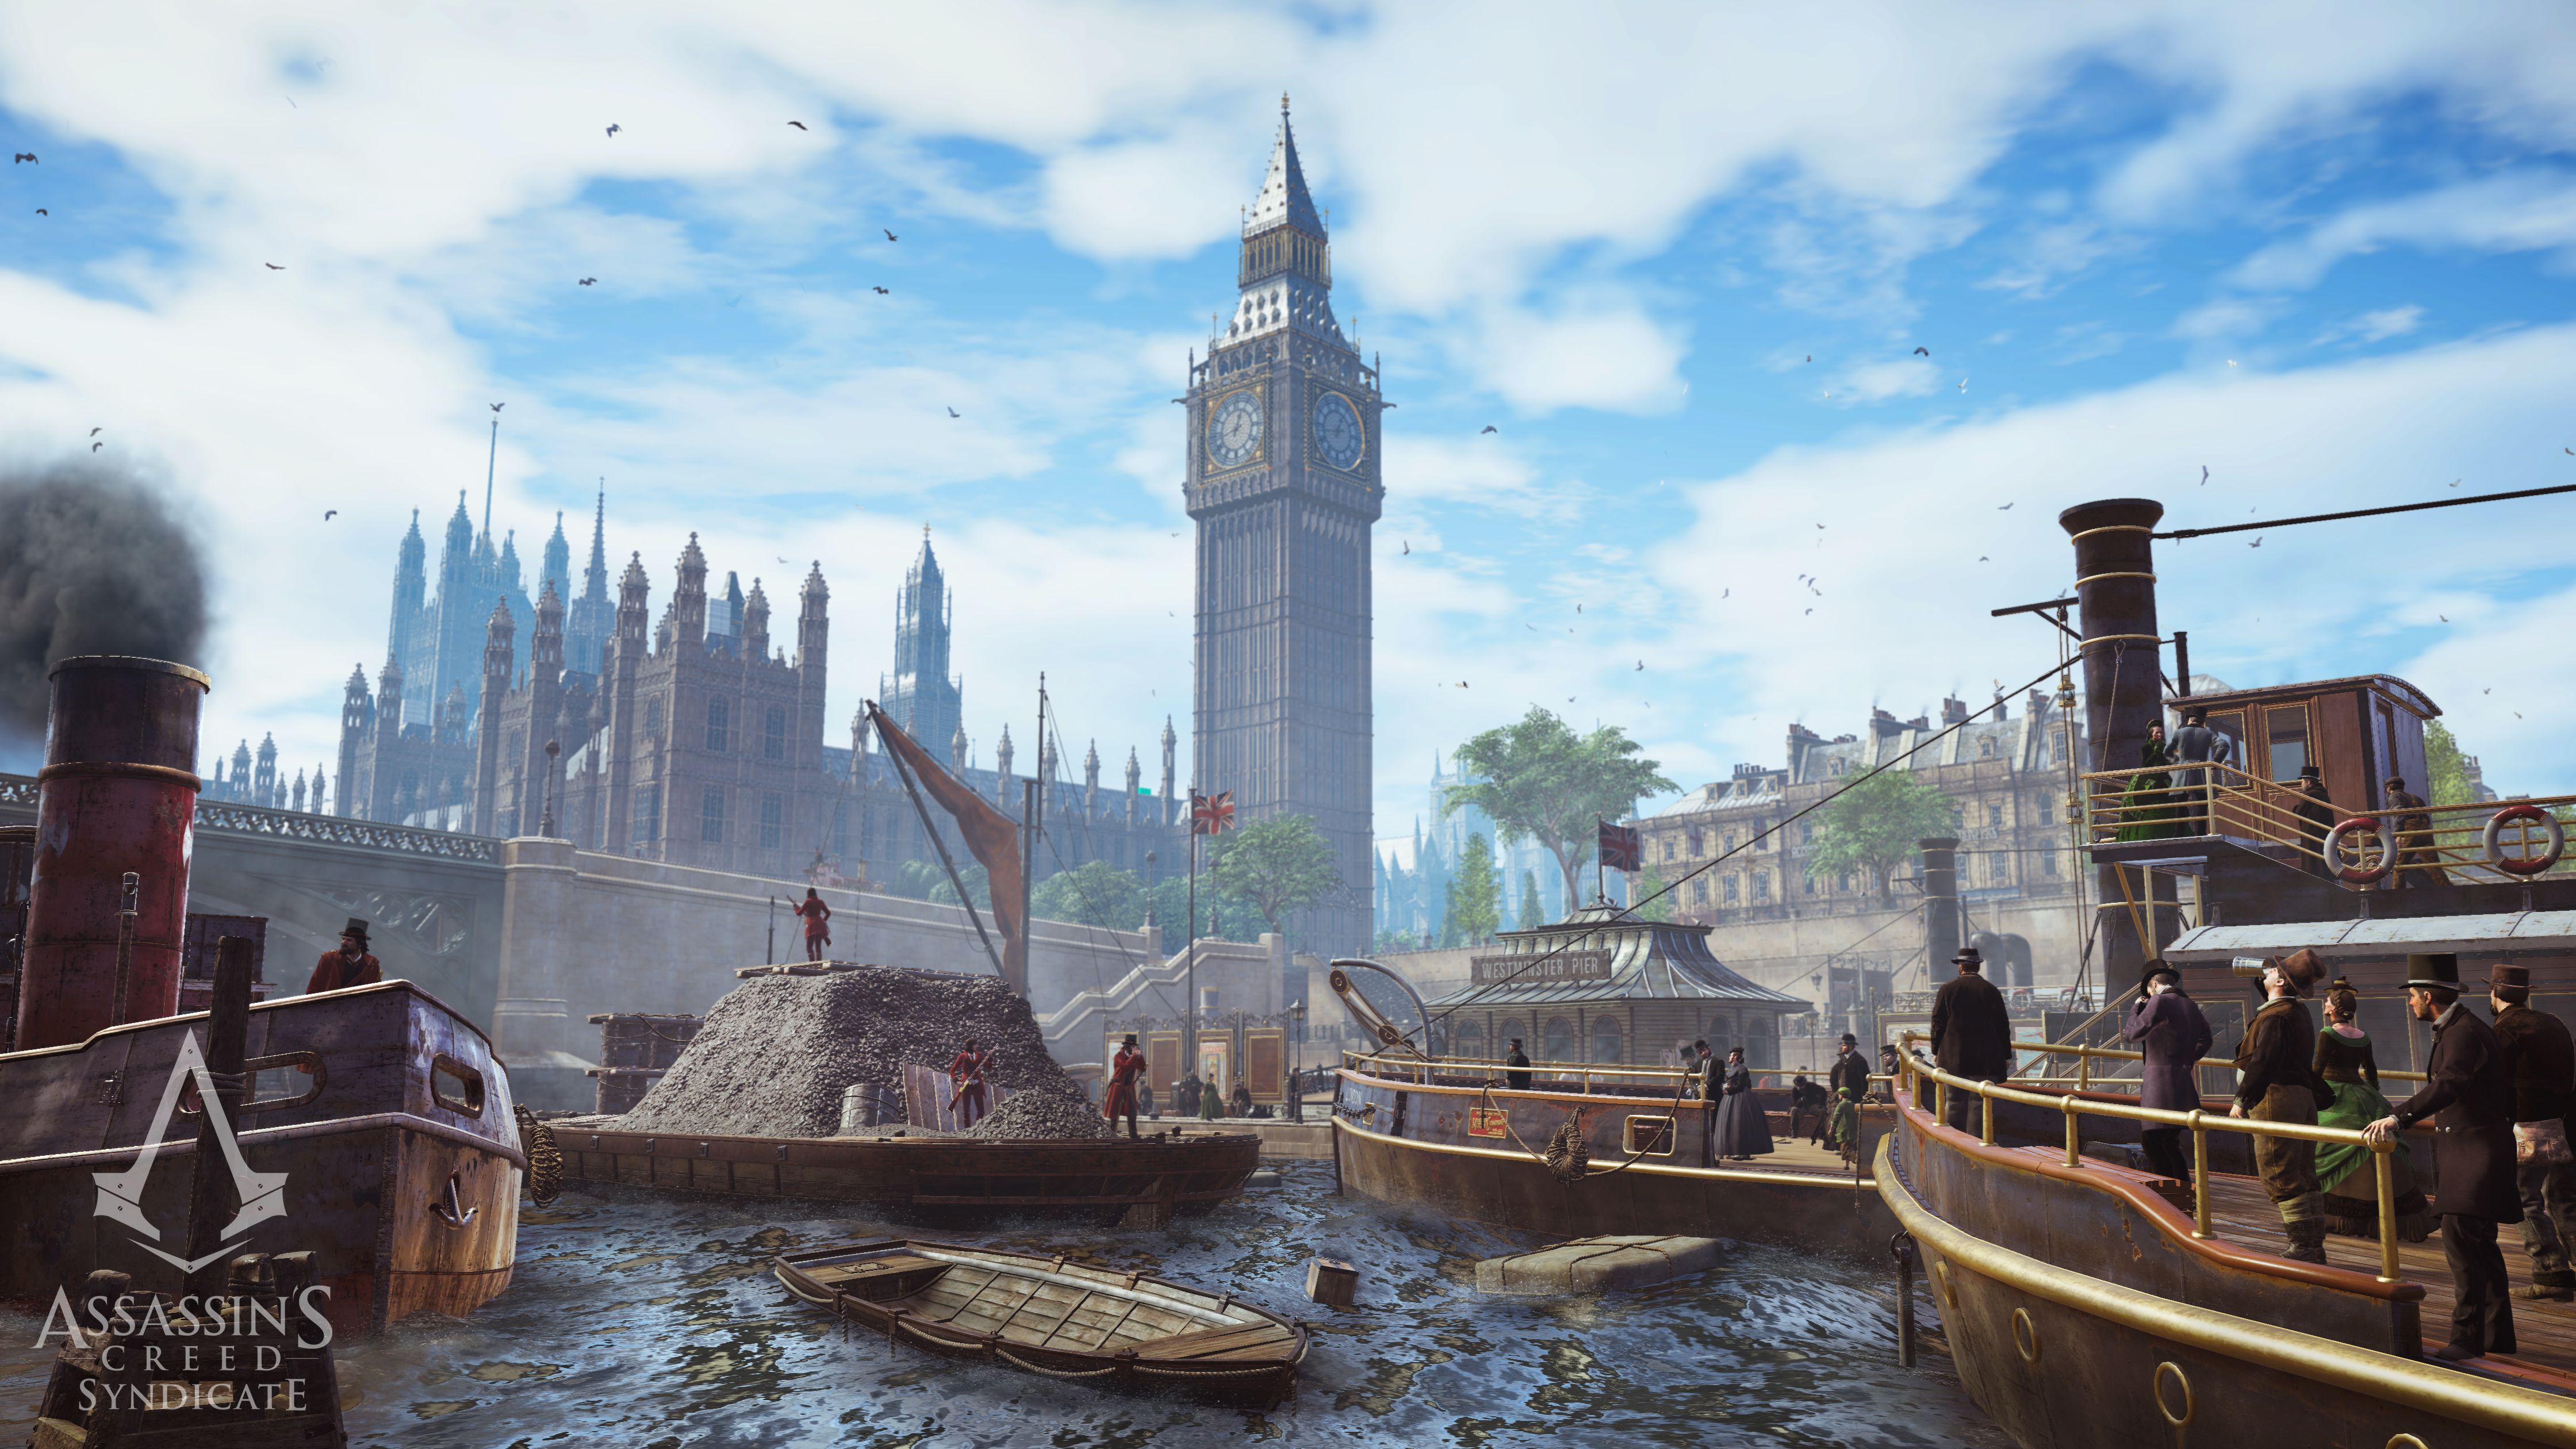 River Thames | Assassin's Creed Wiki | FANDOM powered by Wikia